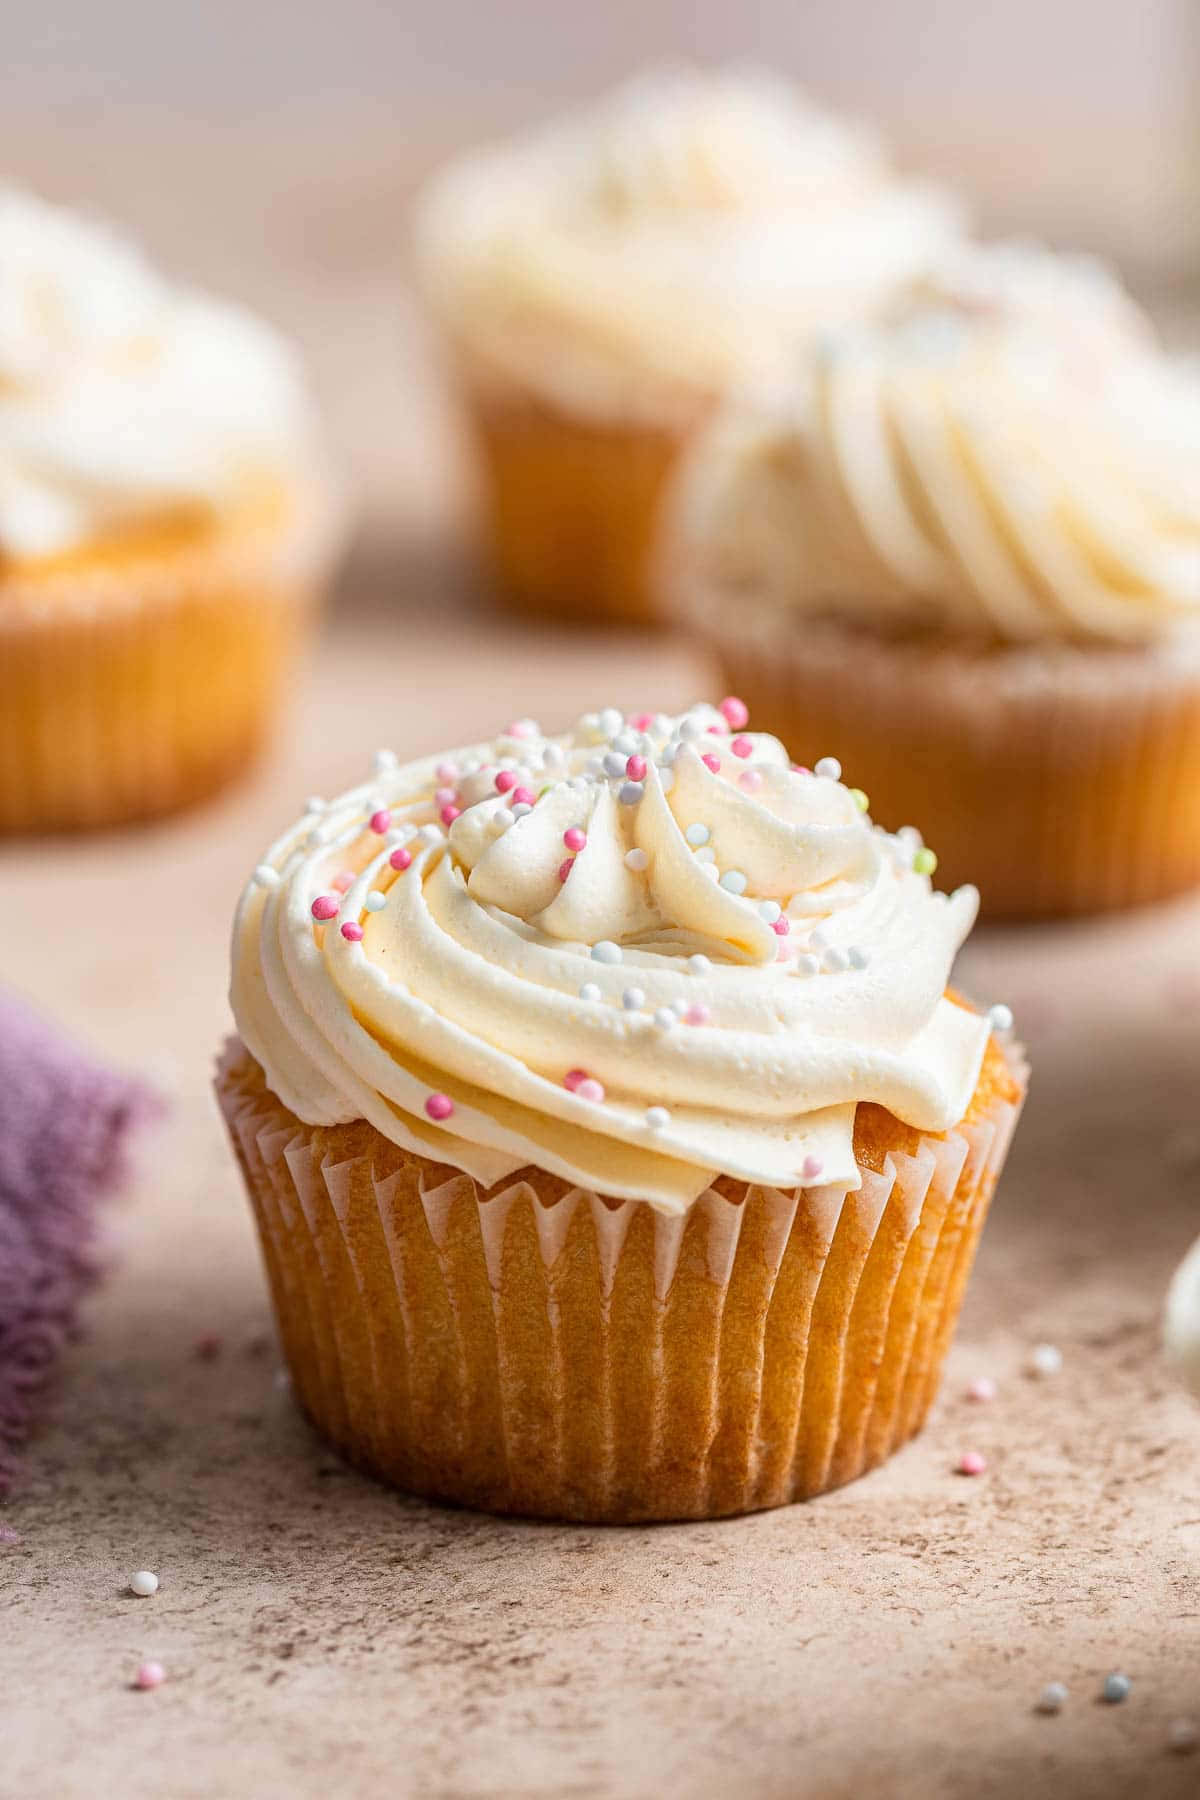 A classic cupcake topped with vibrant sprinkles